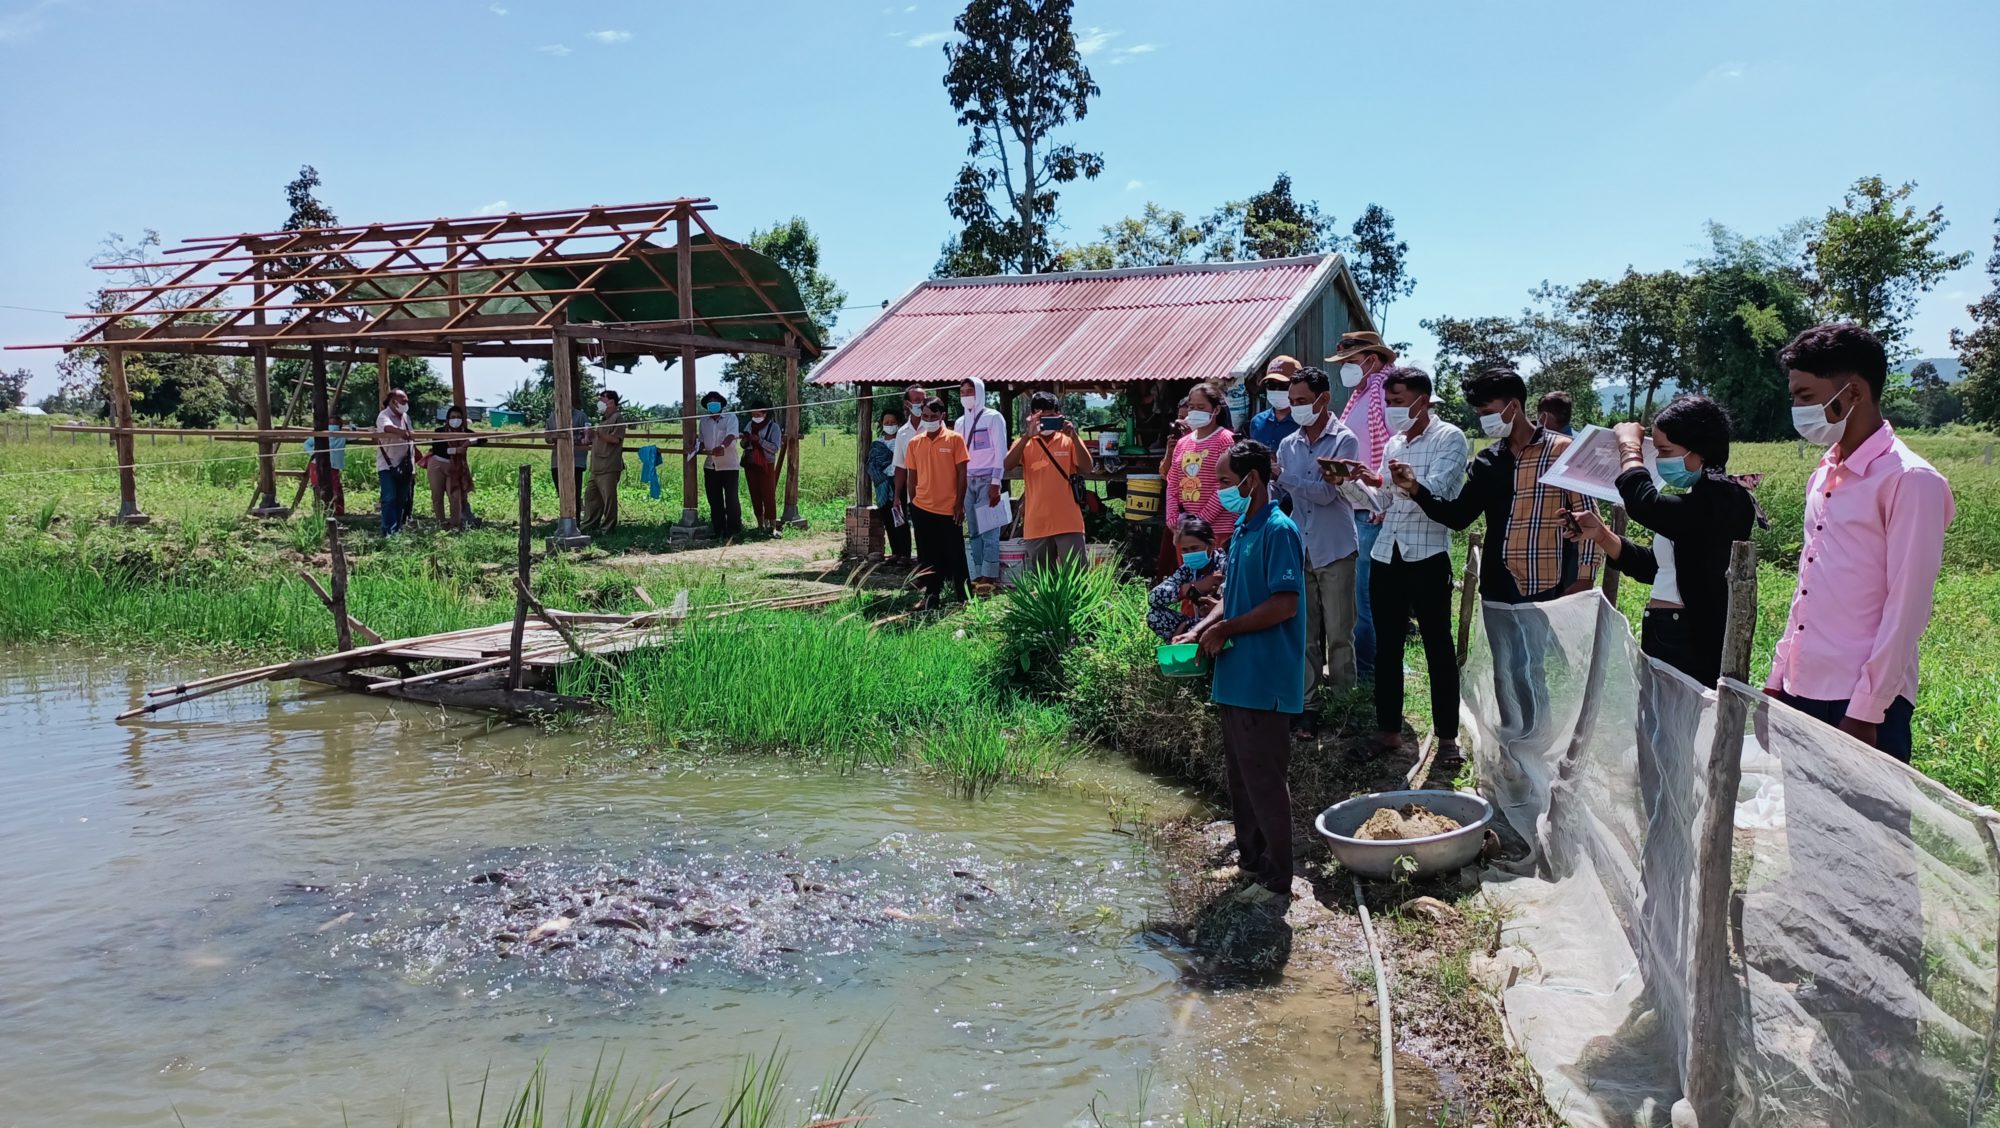 A farming community in Cambodia learning new practices for income generation.